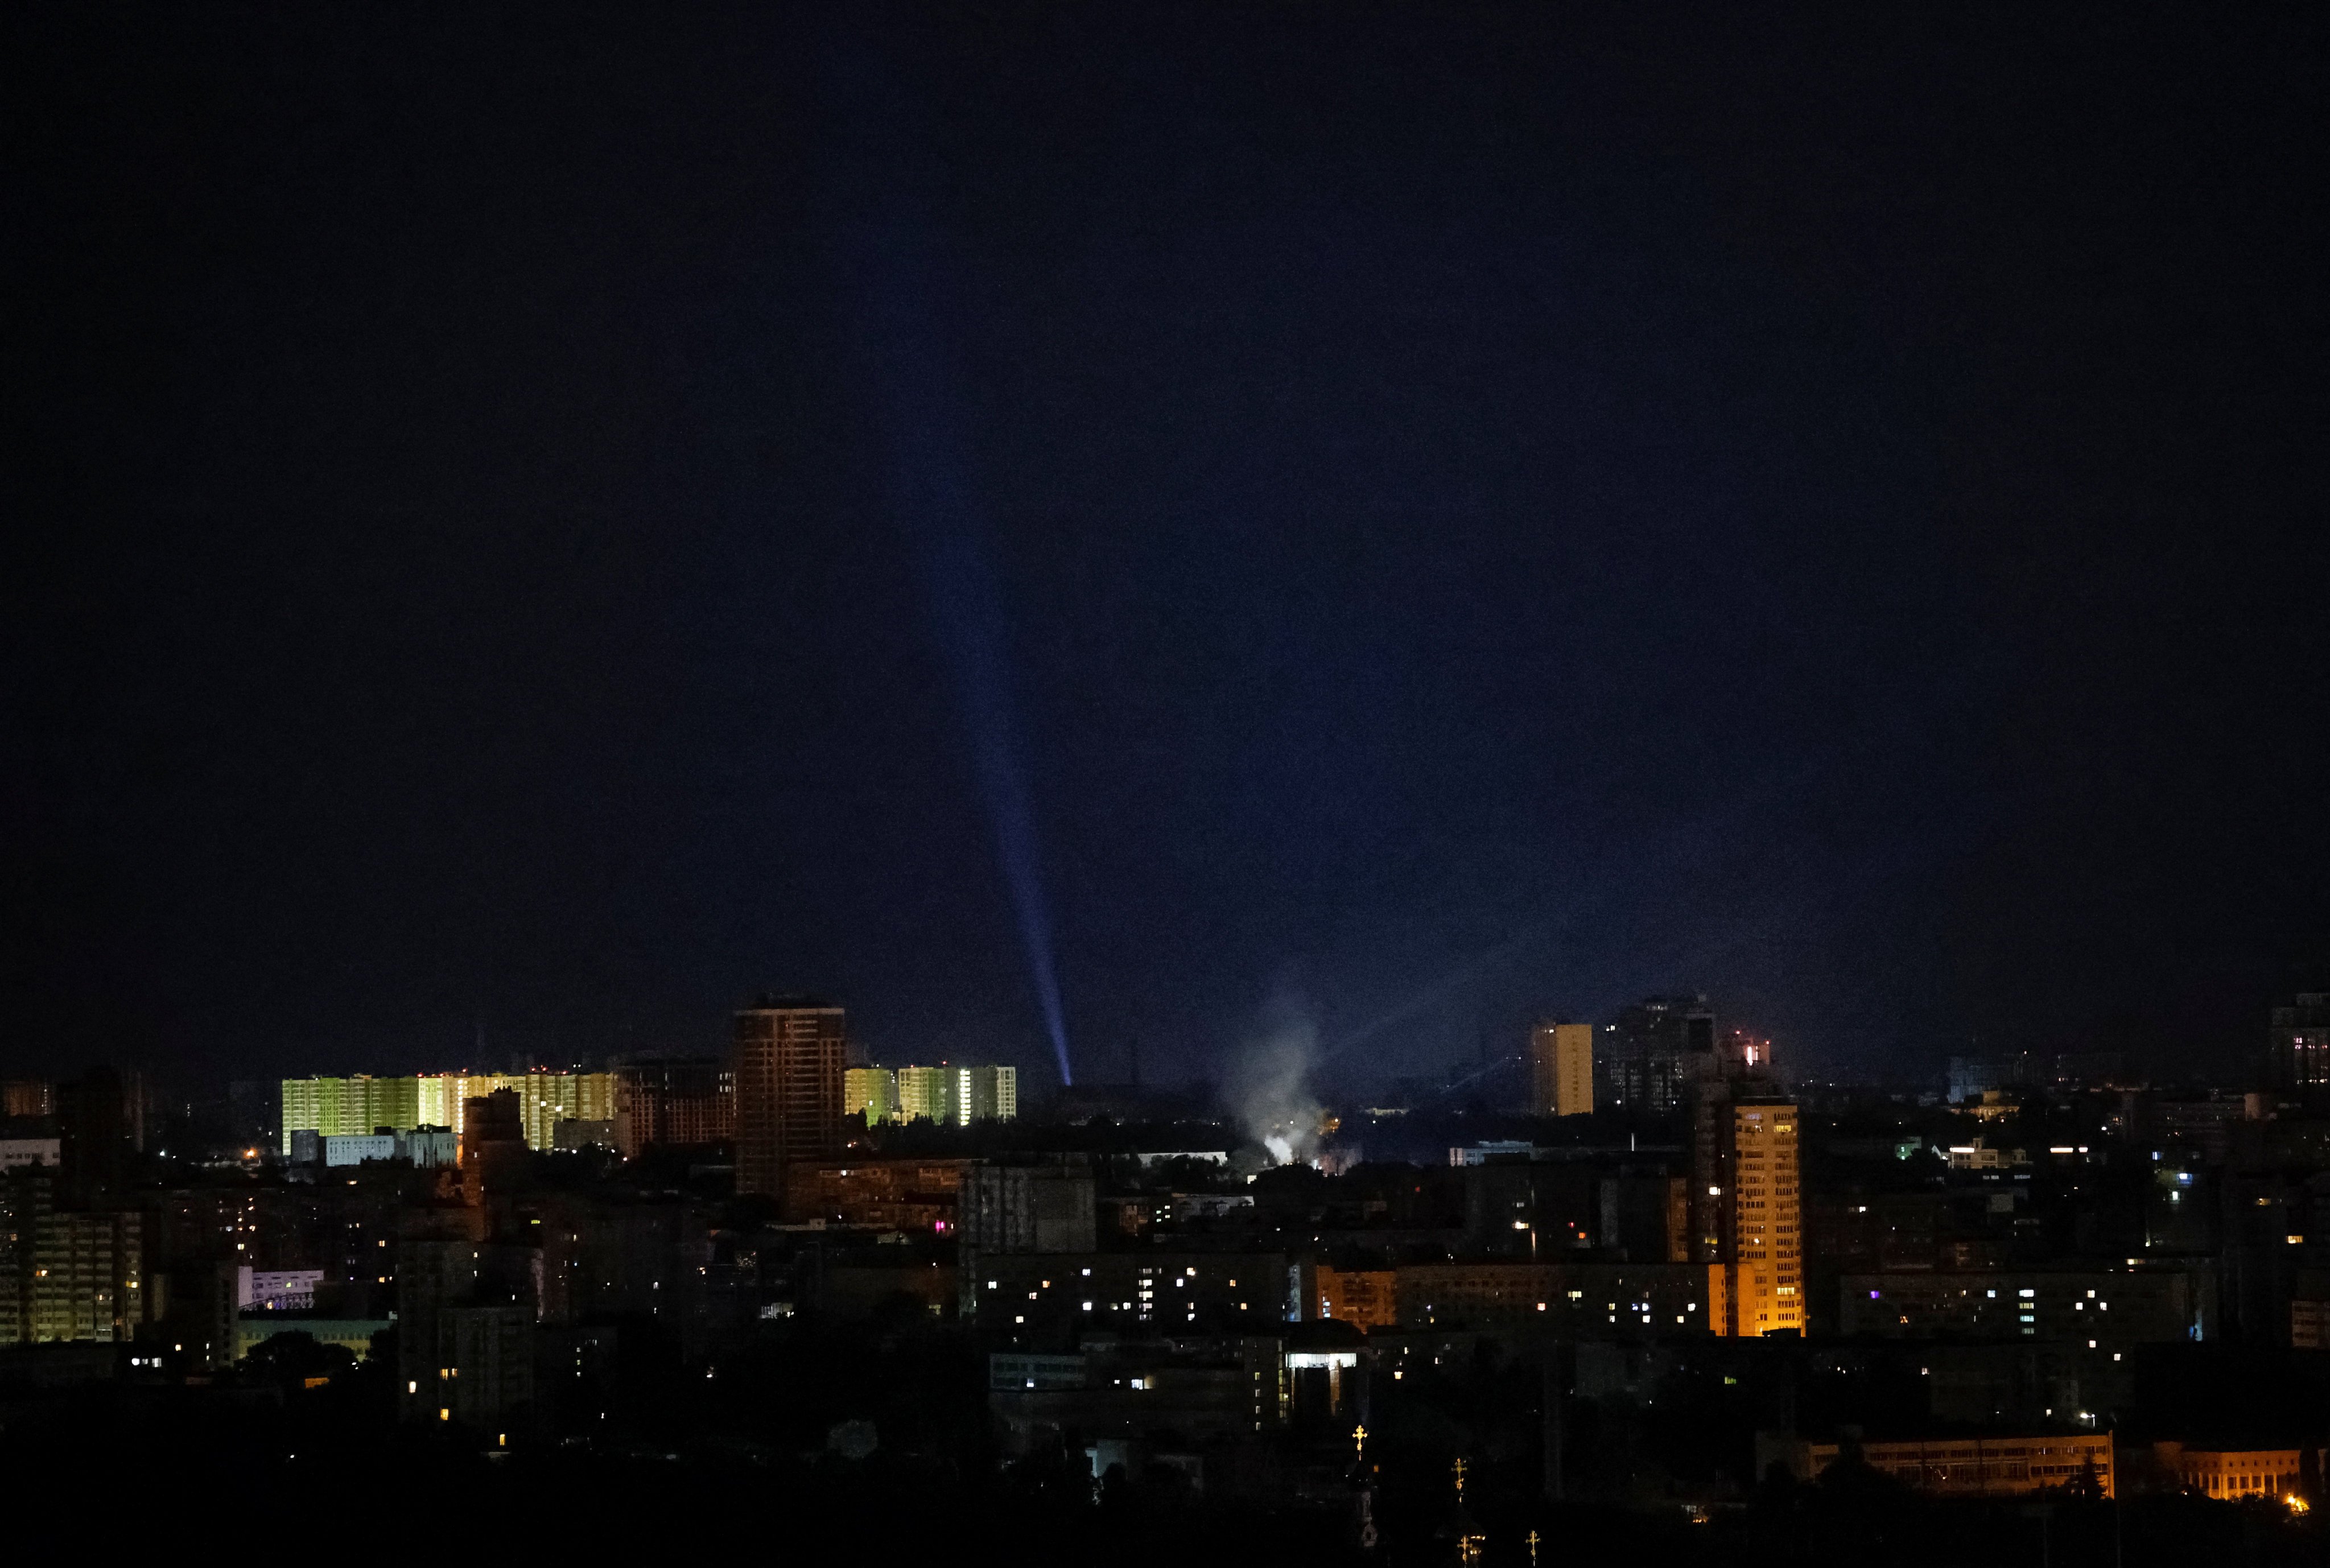 Ukrainian servicemen use searchlights as they look for drones in the sky over the city during a Russian drone strike, amid Russia’s attack on Ukraine, in Kyiv, Ukraine, on Sunday. Photo: Reuters